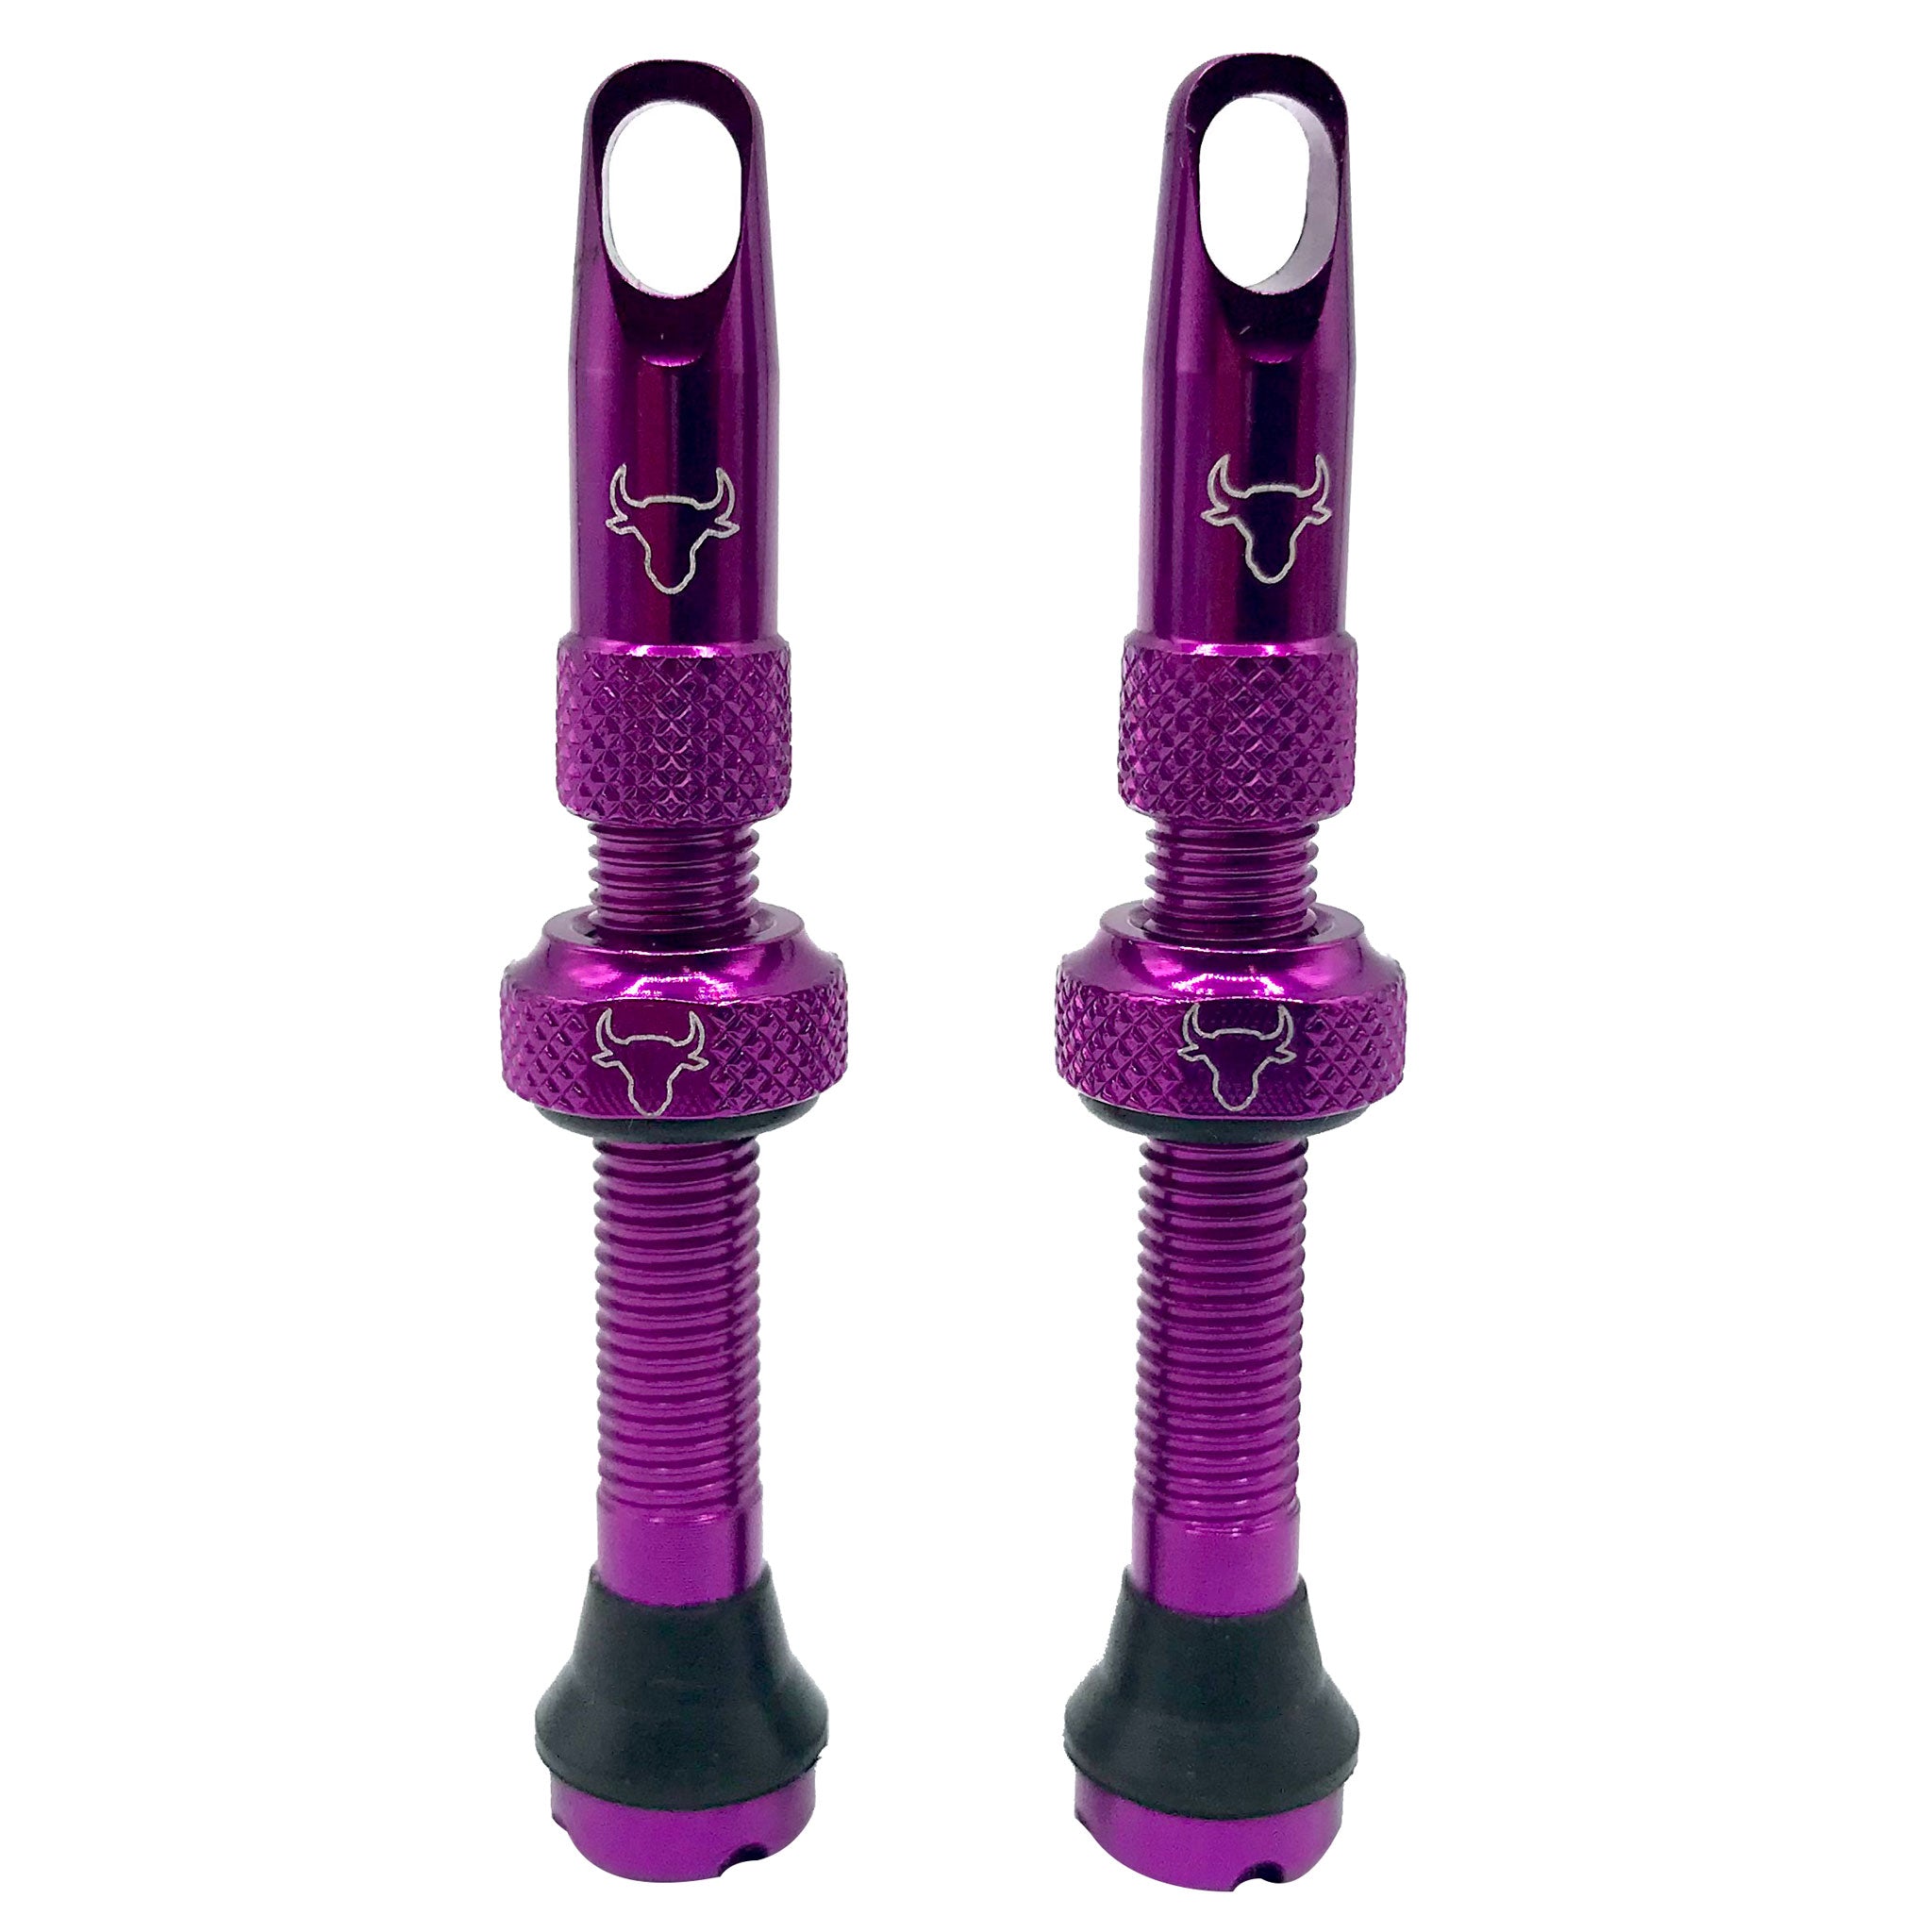 Hold Fast Cycling Tubeless Valve Stem 42mm (Pair) - Purple